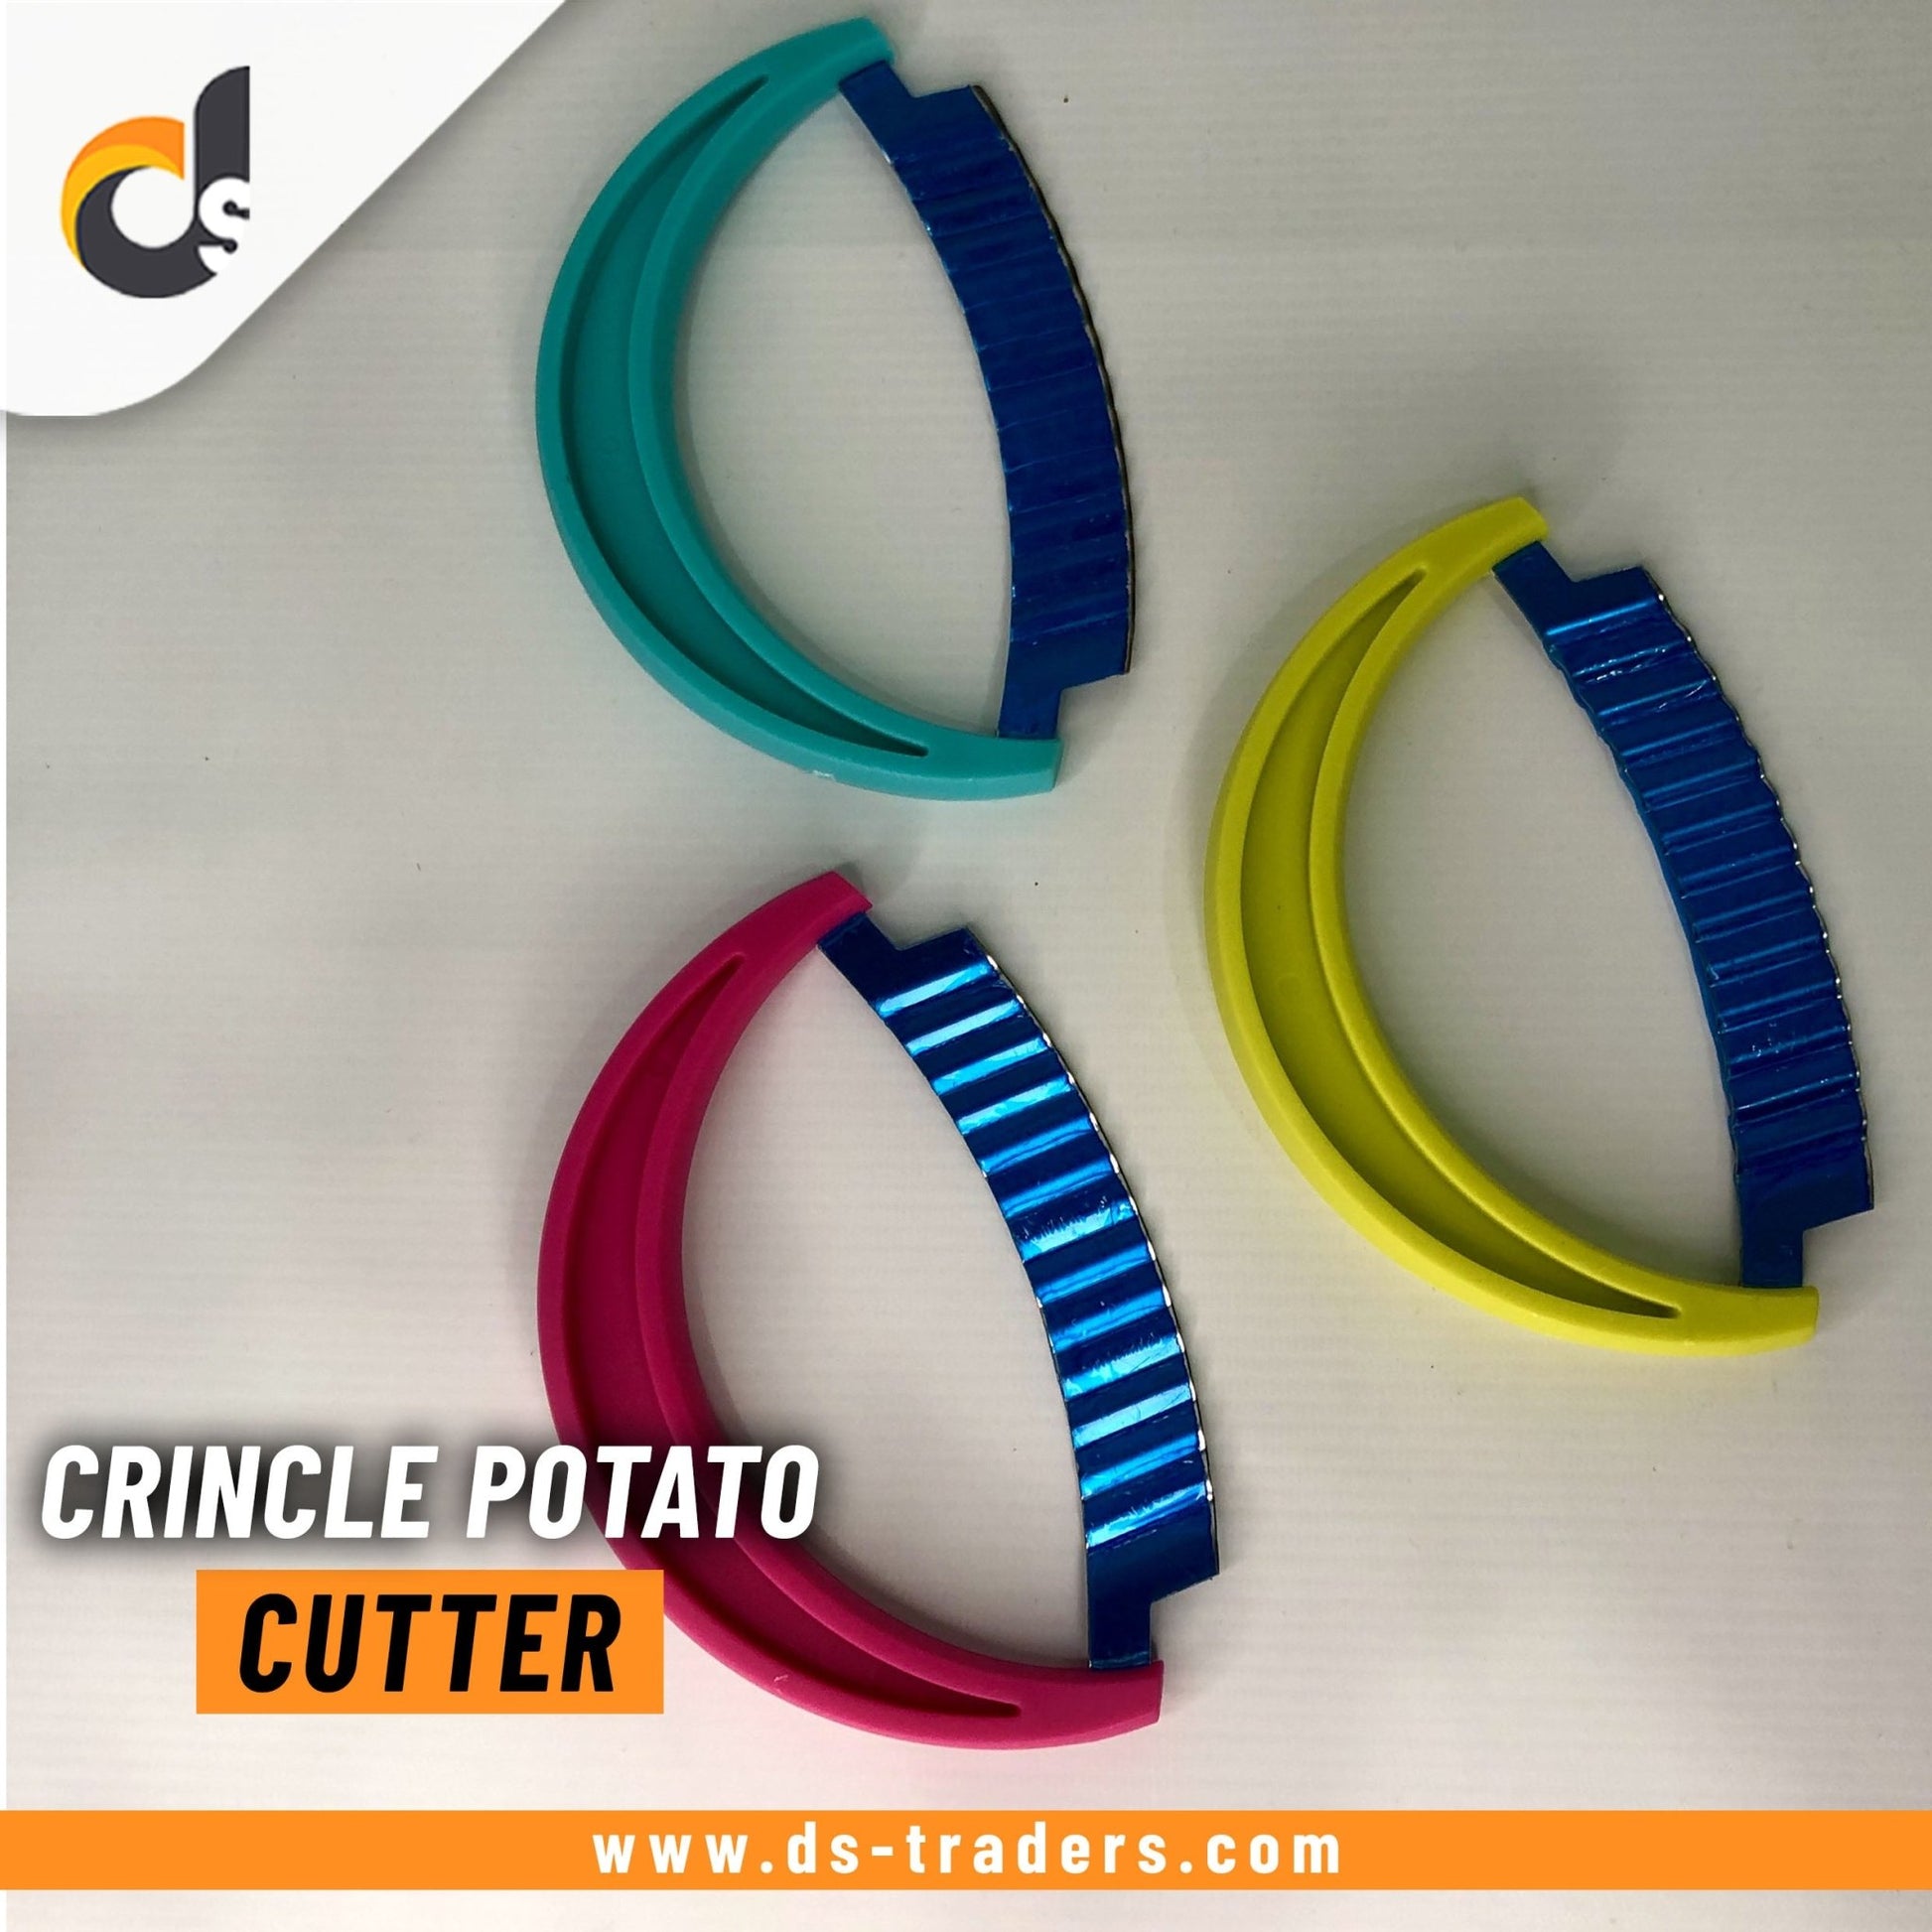 Crincle Shape Potato Cutter - DS Traders